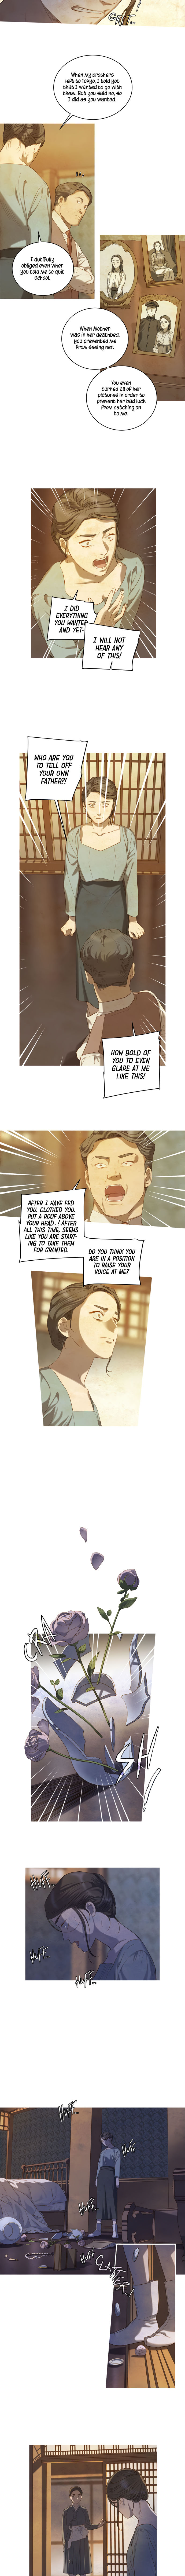 Gorae Byul - The Gyeongseong Mermaid - Chapter 12 Page 6